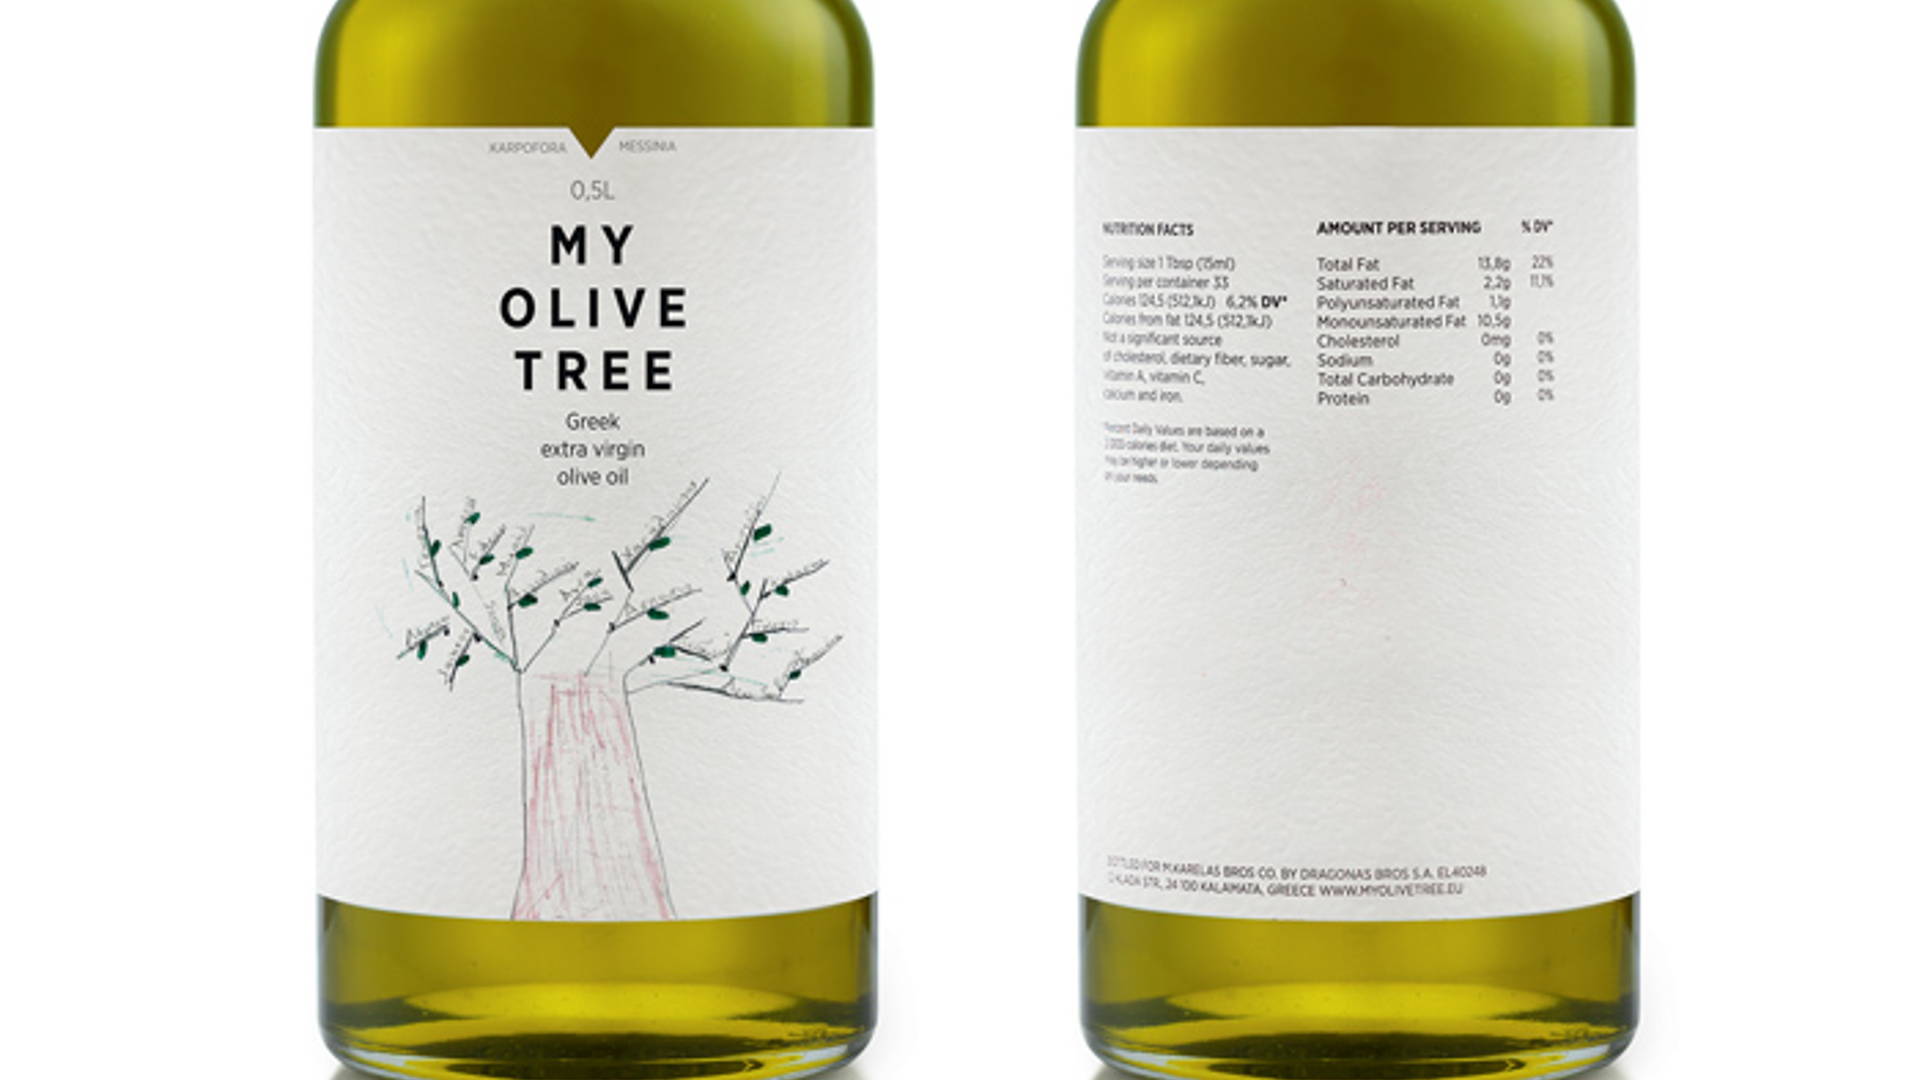 Featured image for The Dieline Package Design Awards 2013: Dairy, Spices, Oils, Sauces, & Condiments, 3rd Place - My Olive Tree 